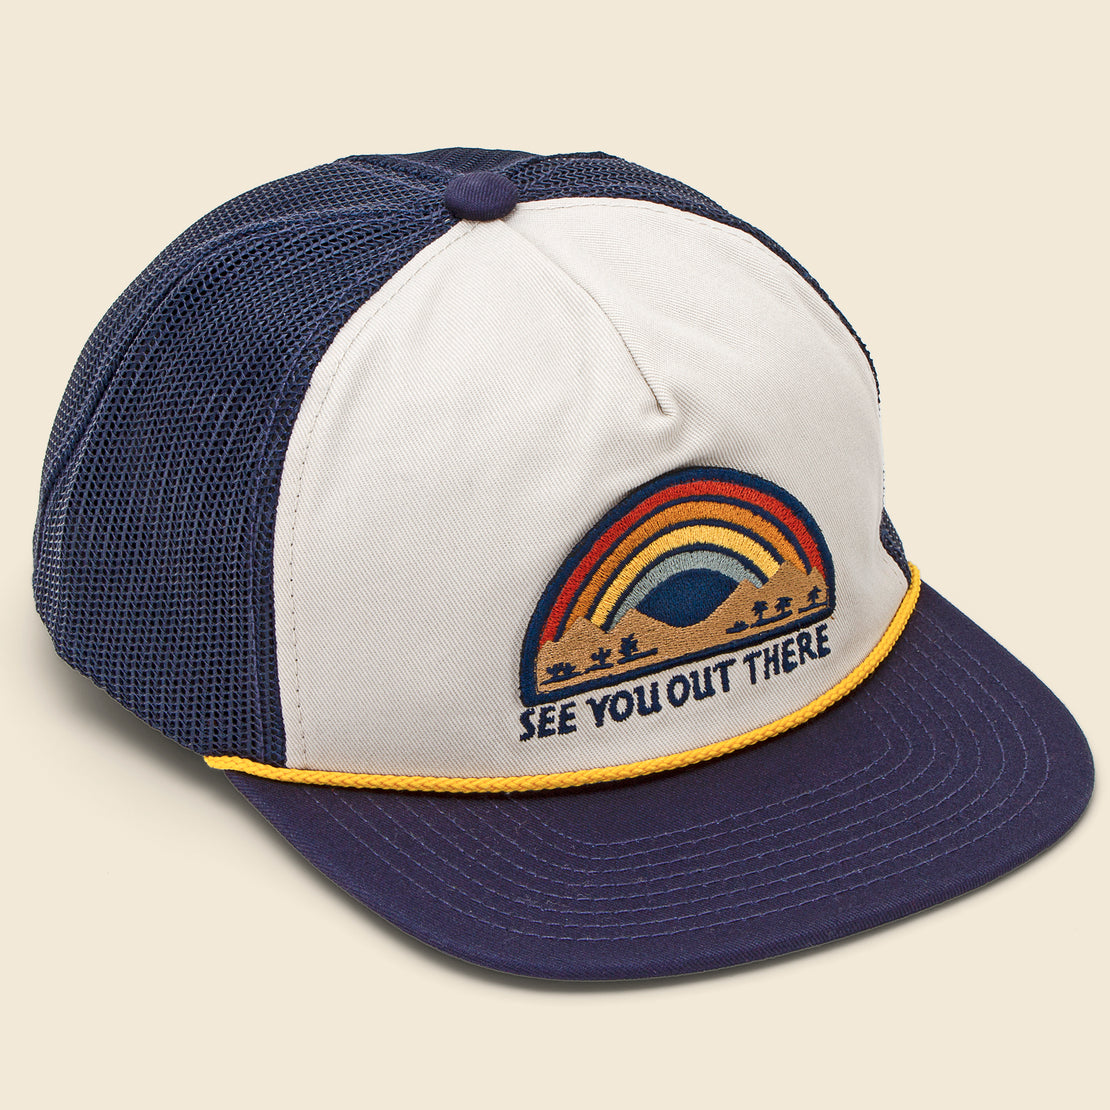 Katin See You Out There Trucker Hat - Navy/White